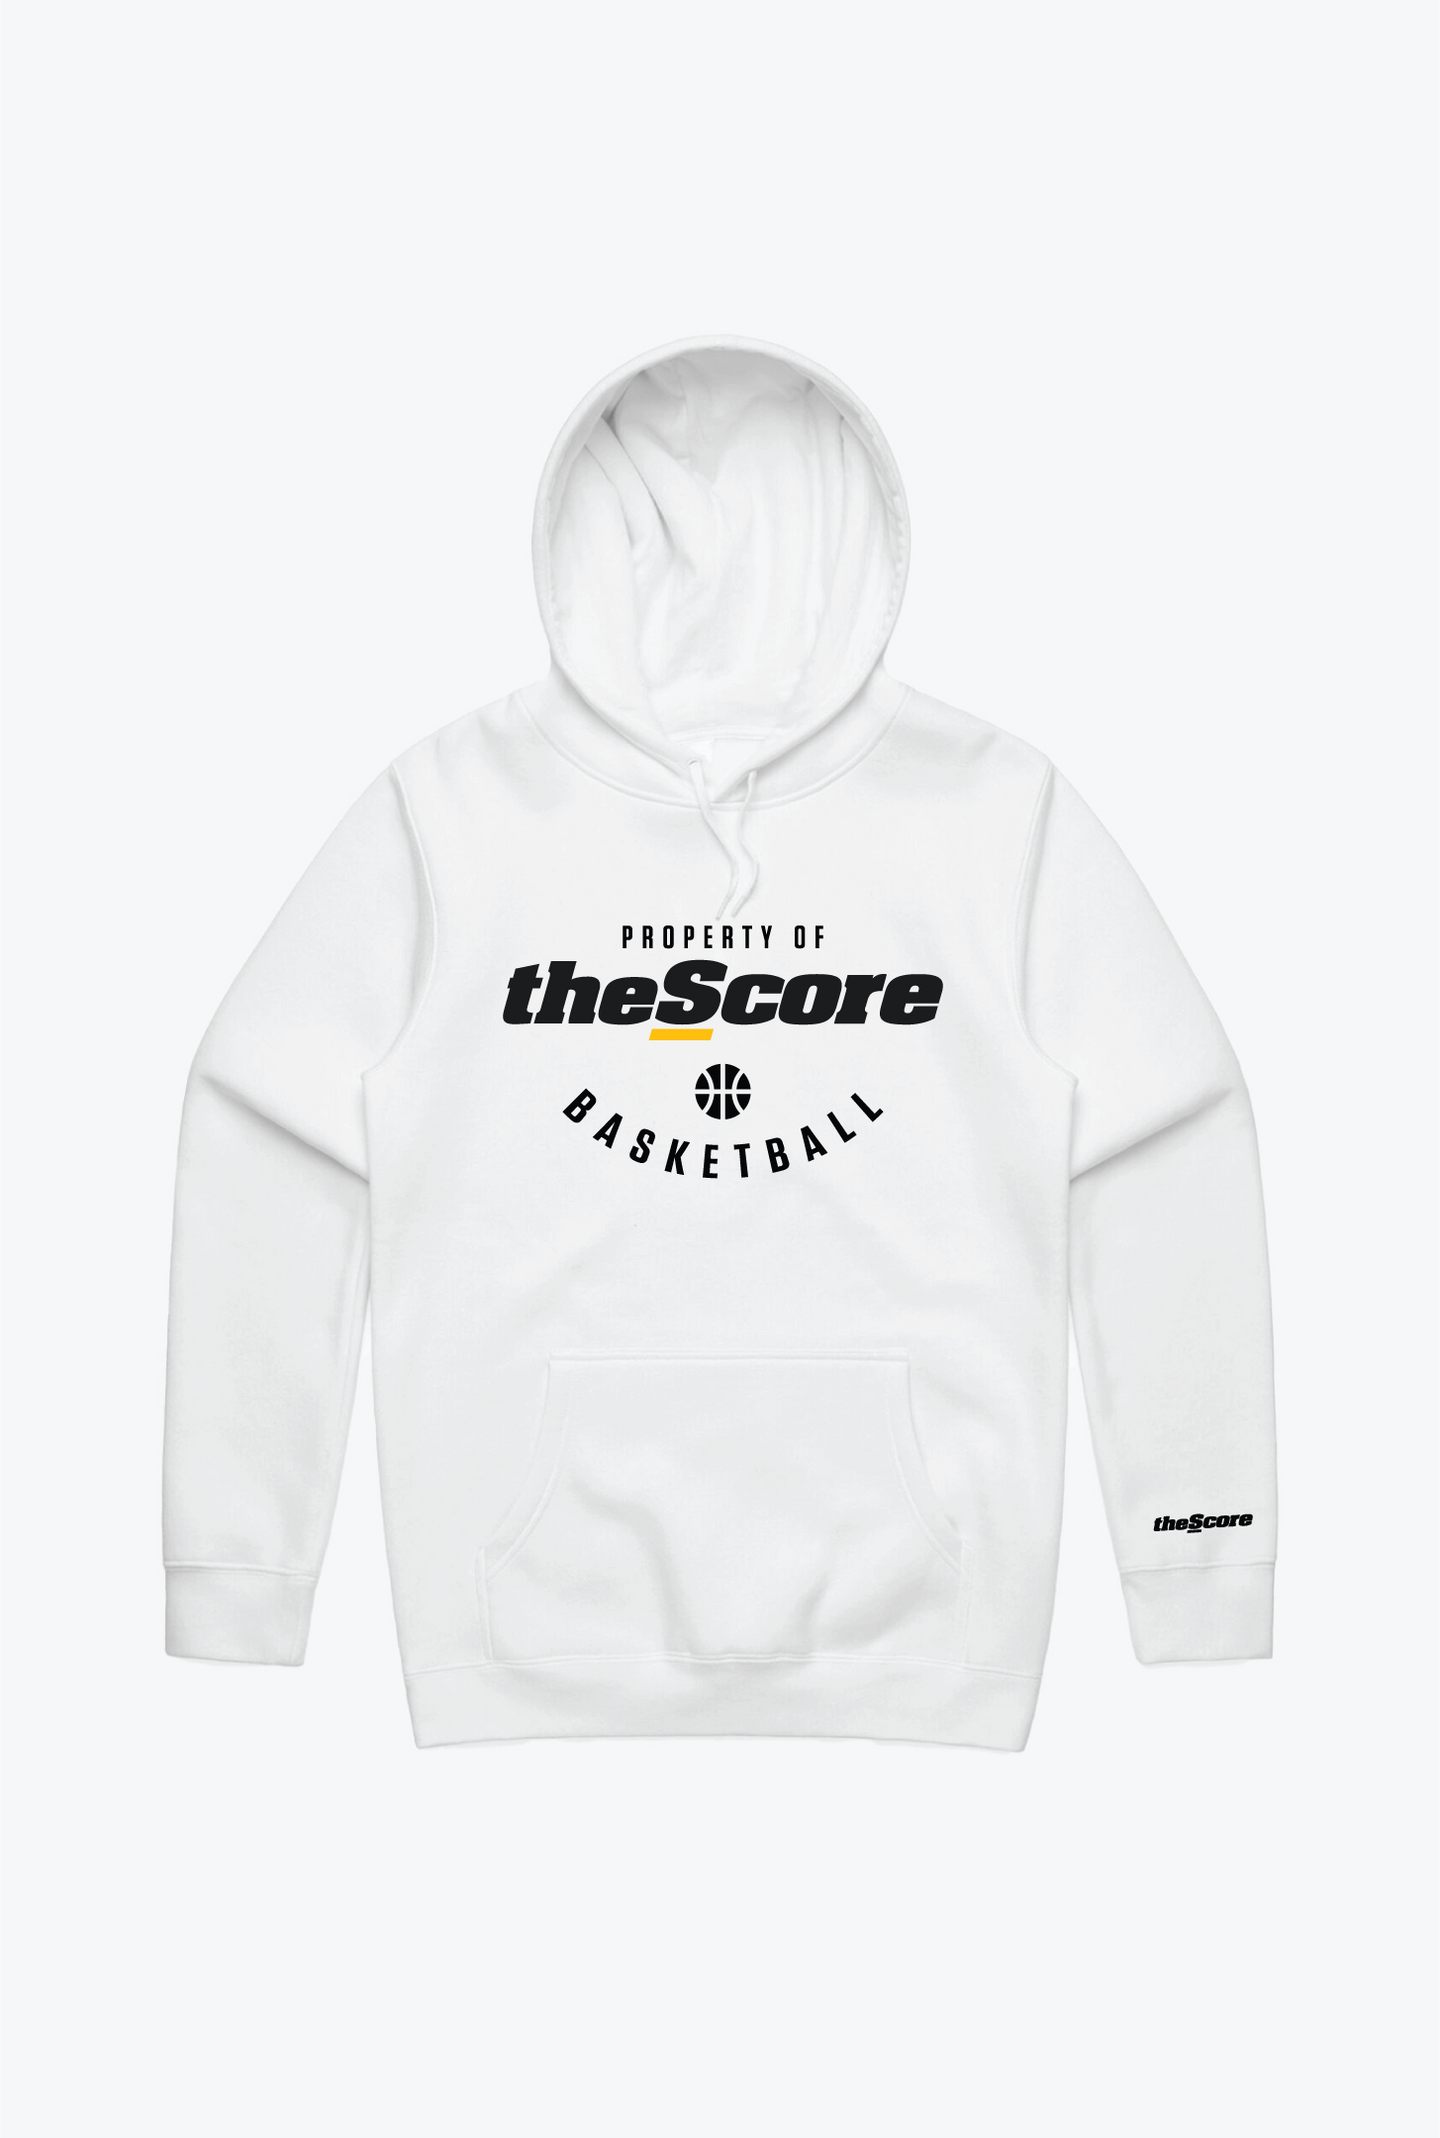 Property of theScore Basketball Hoodie - White